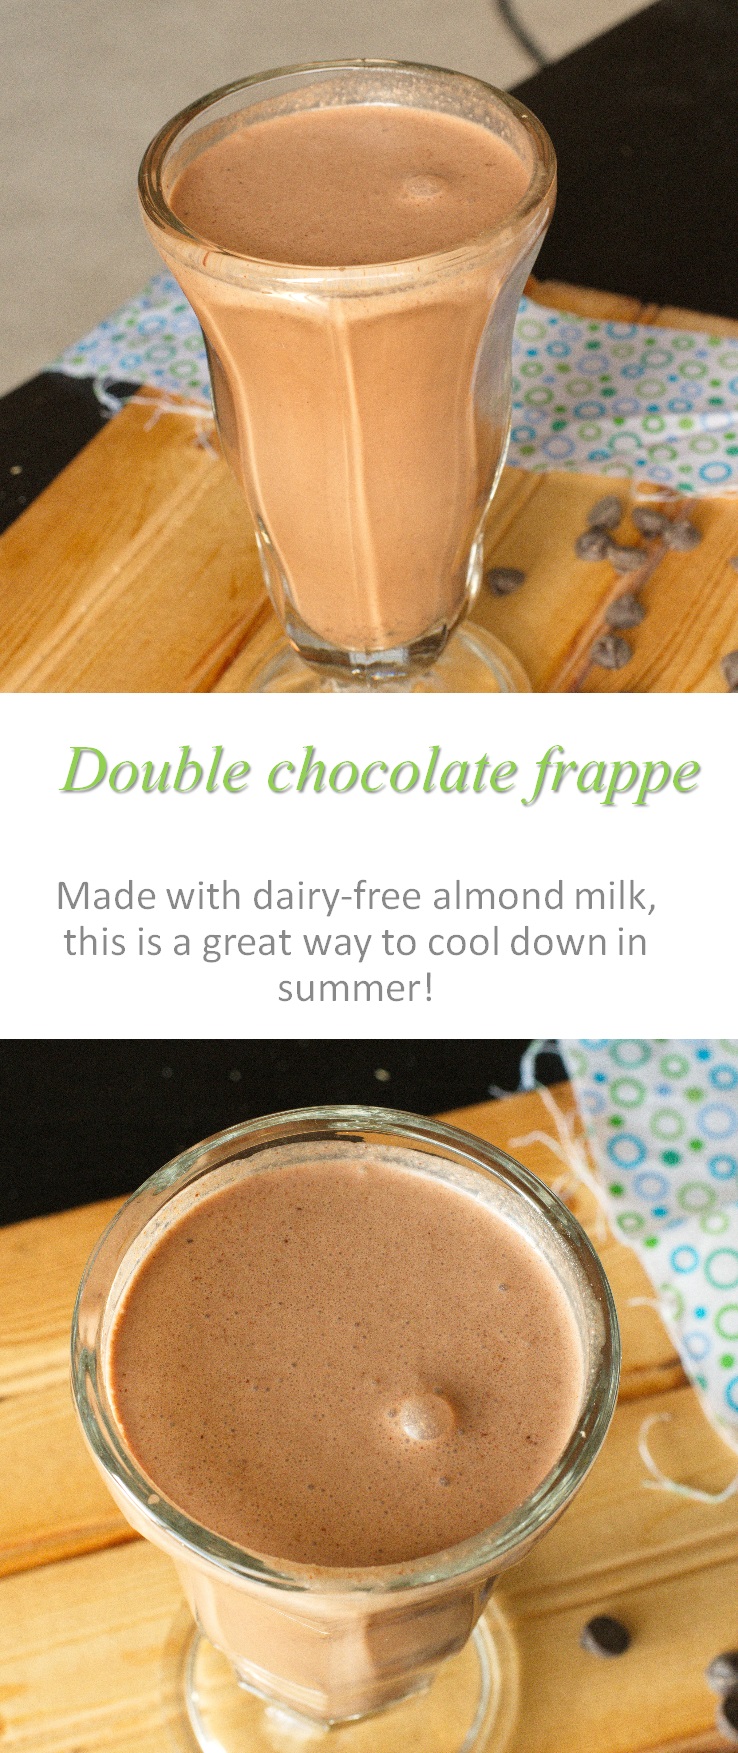 A frappe is simply ice, milk, and flavouring, so I could easily make a yummy chocolate frappe for everyone, with dairy-free milk for me! #frappe